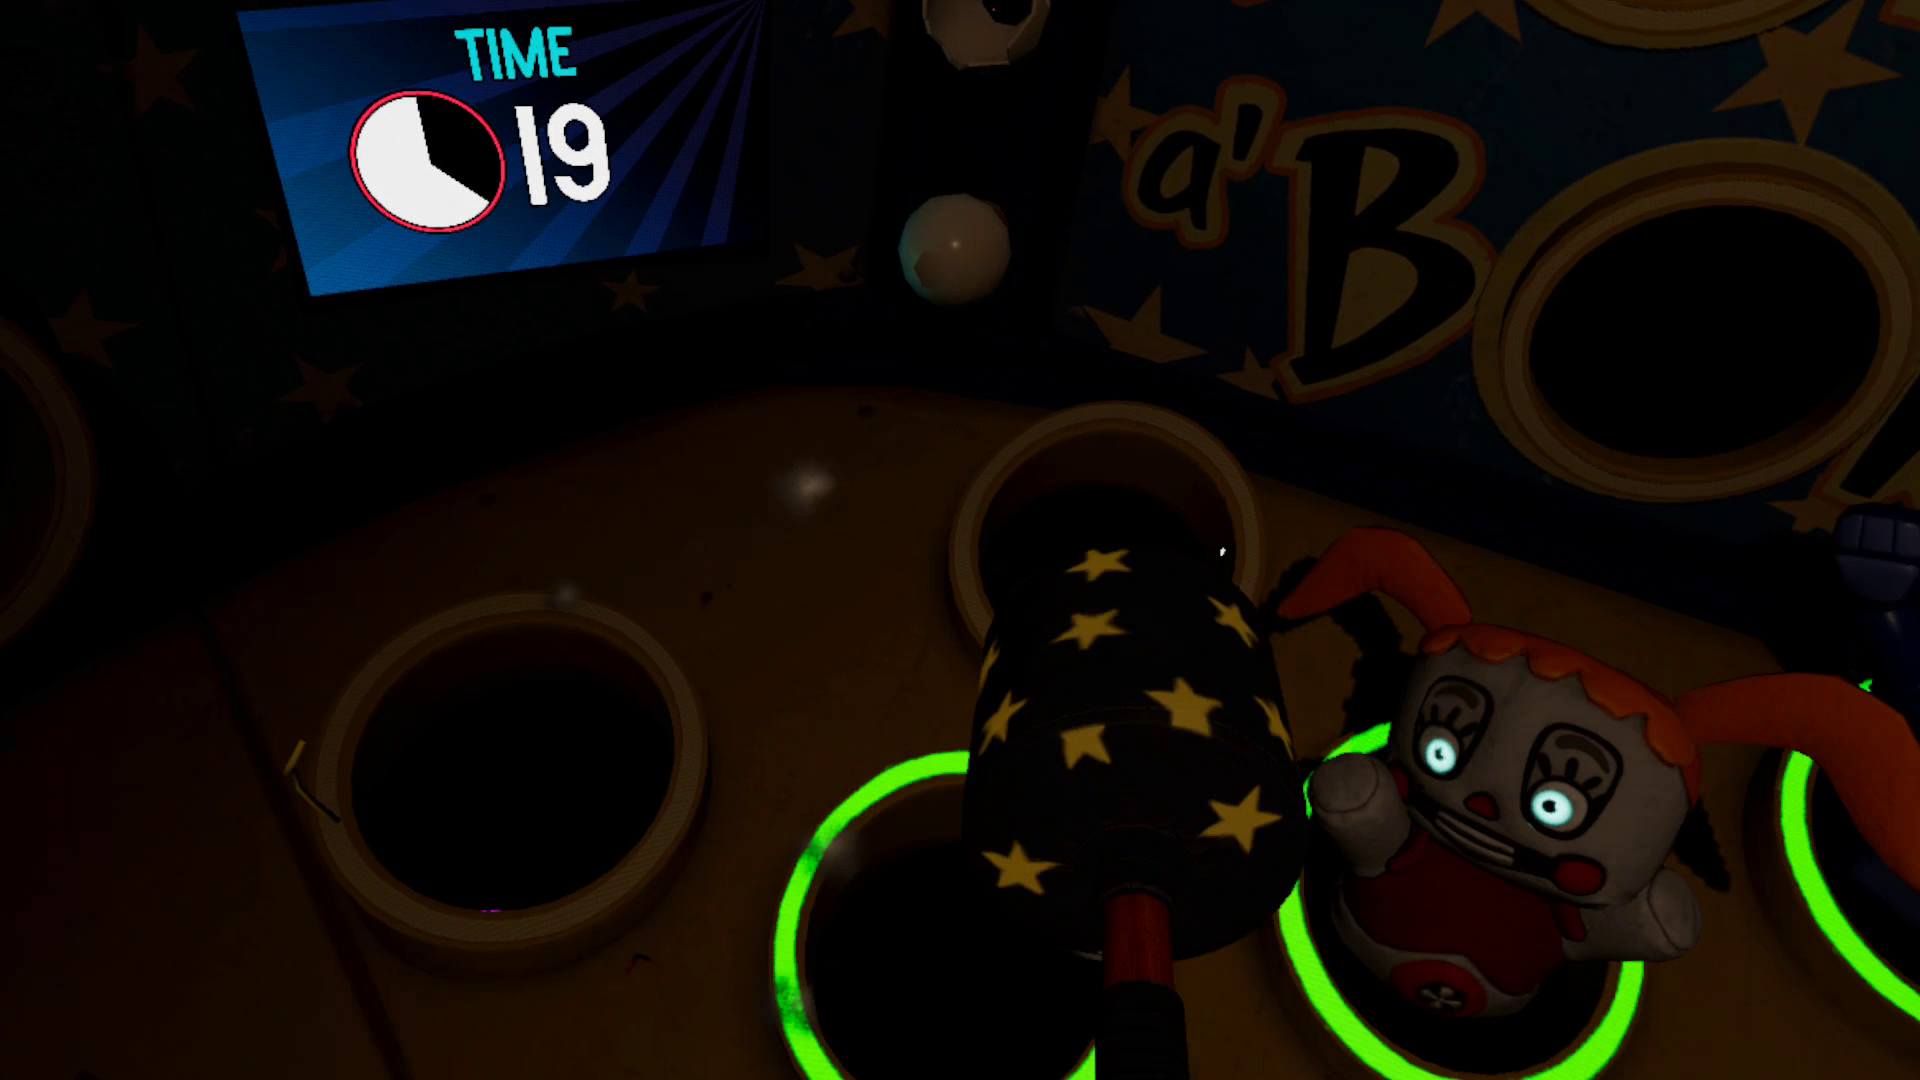 A whack-a-mole themed minigame with a timer counting down as a plush version of Circus Baby leaps out at the player, eyes glowing menacingly